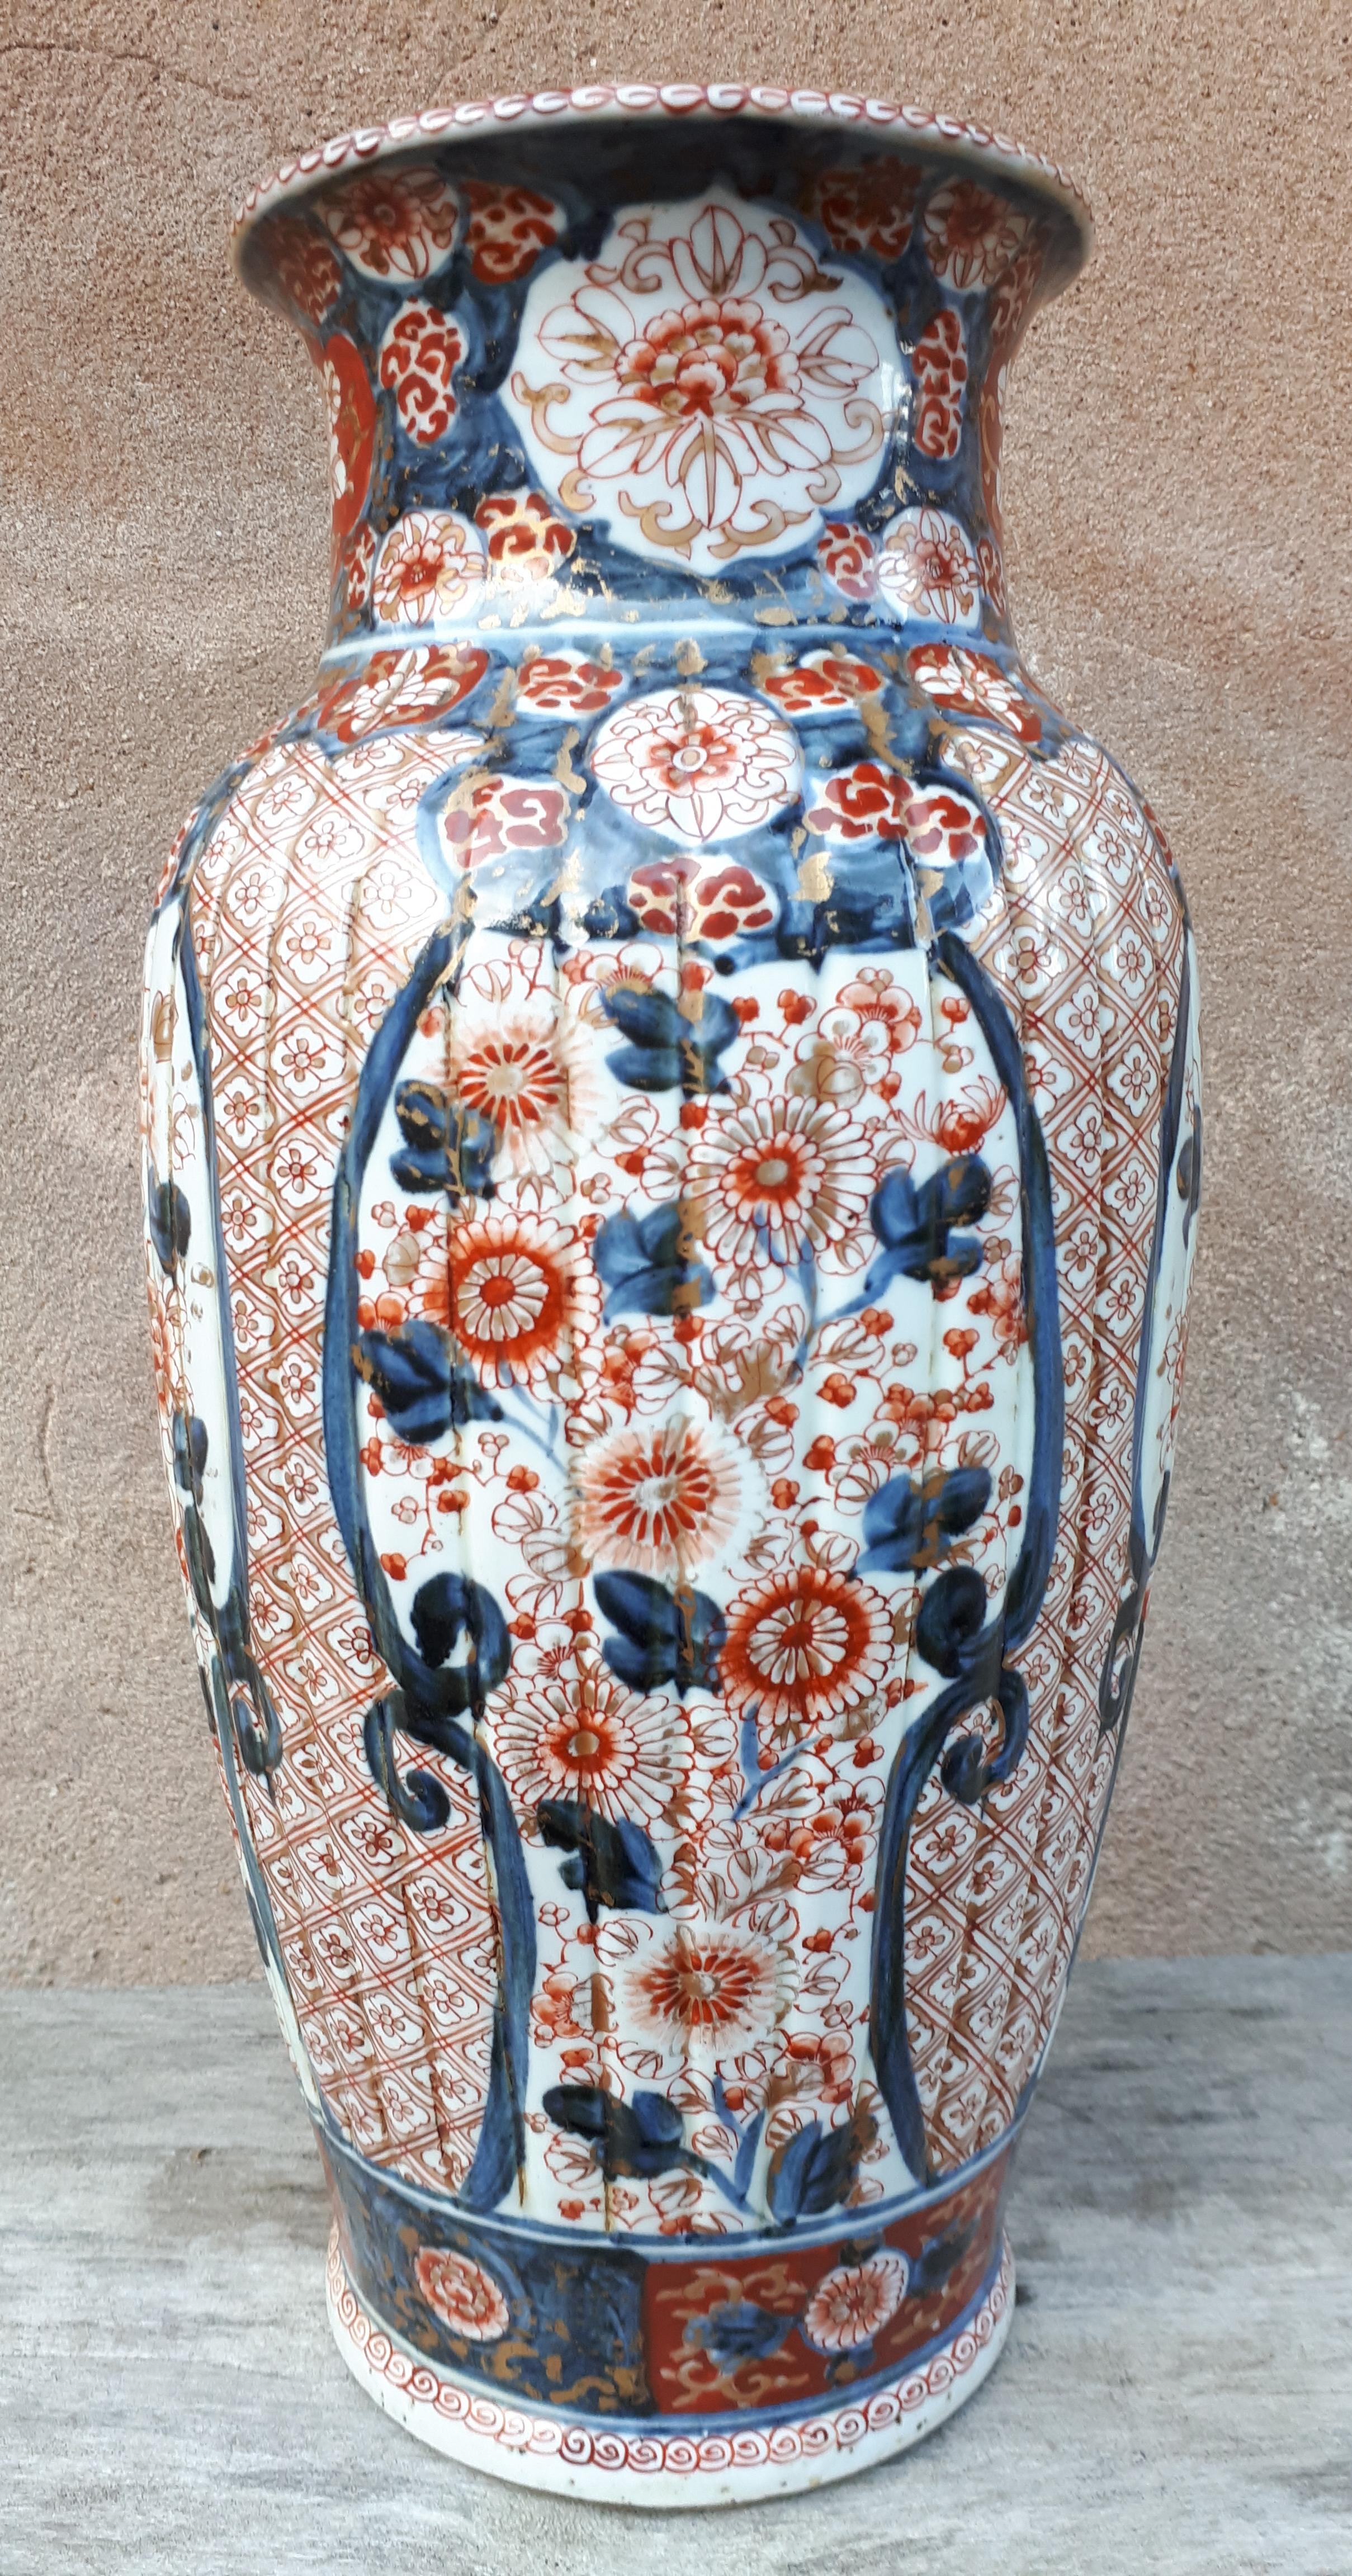 Important vase with gadrooned body in Arita porcelain with blue, coral and gold decoration of flowers in reserves on a background of lattices and foliage.
Japan, 18th century.